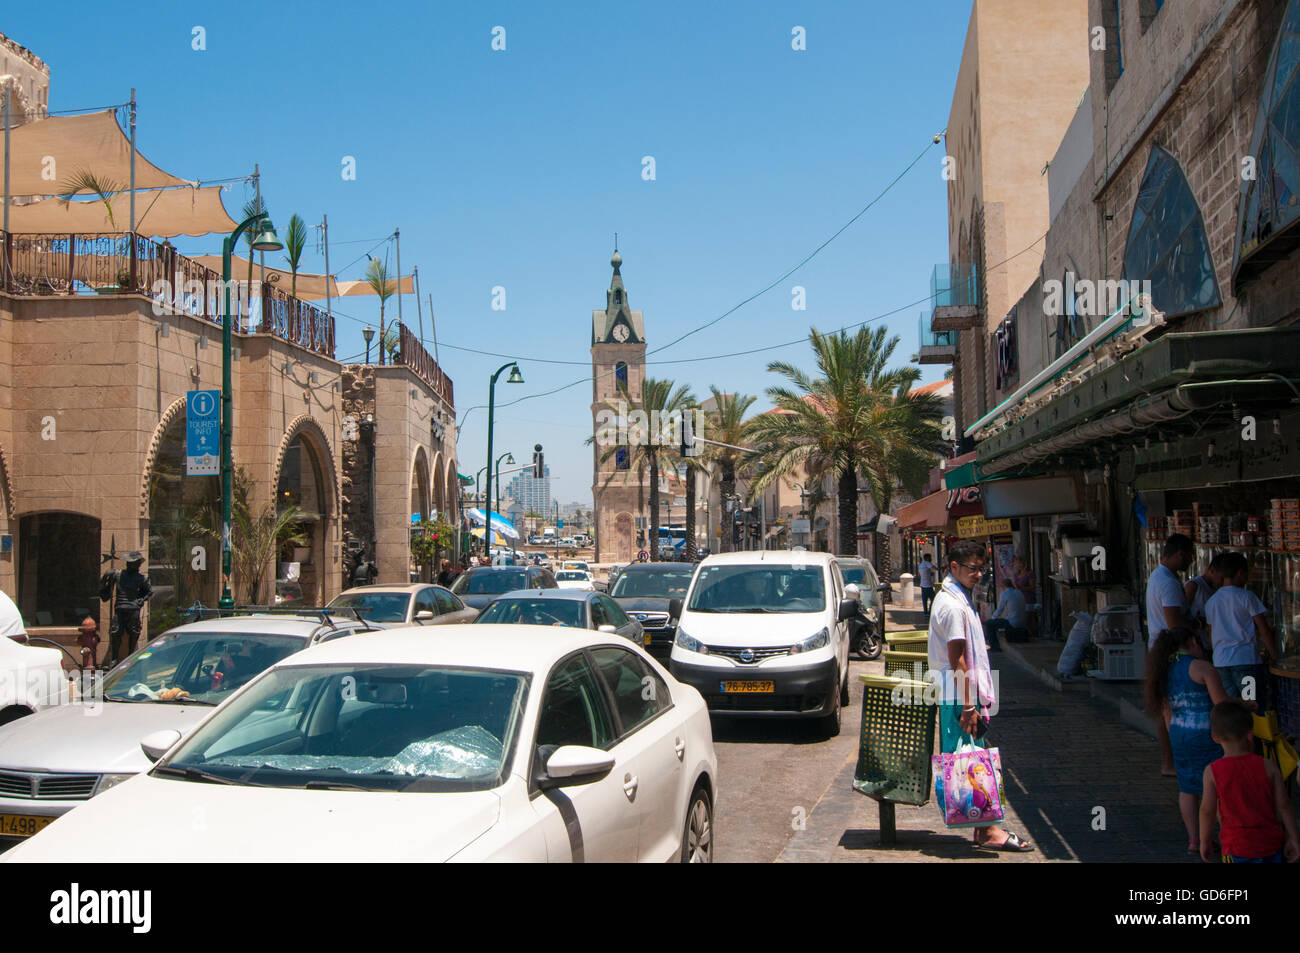 Israel, Jaffa. Yefet Street. The clock tower in the background Stock Photo